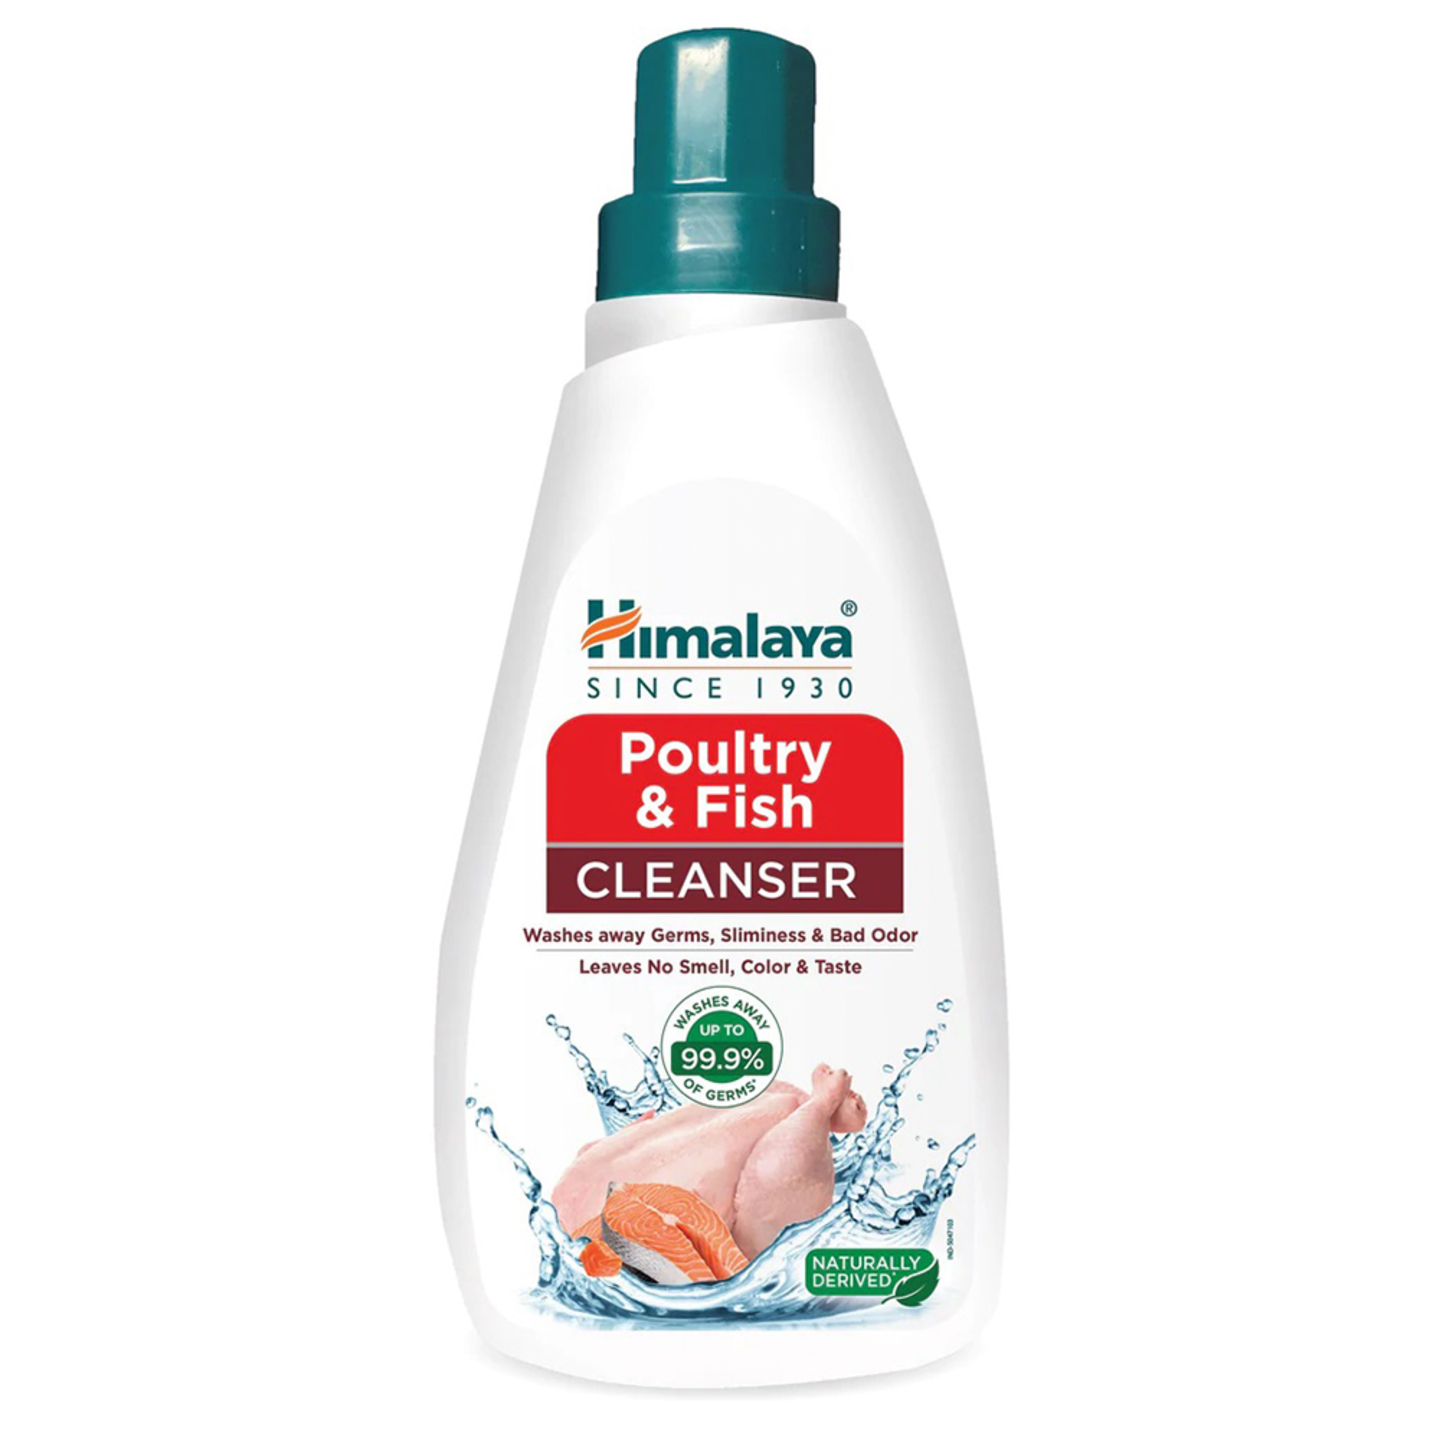 Himalaya Poultry & Fish Cleanser